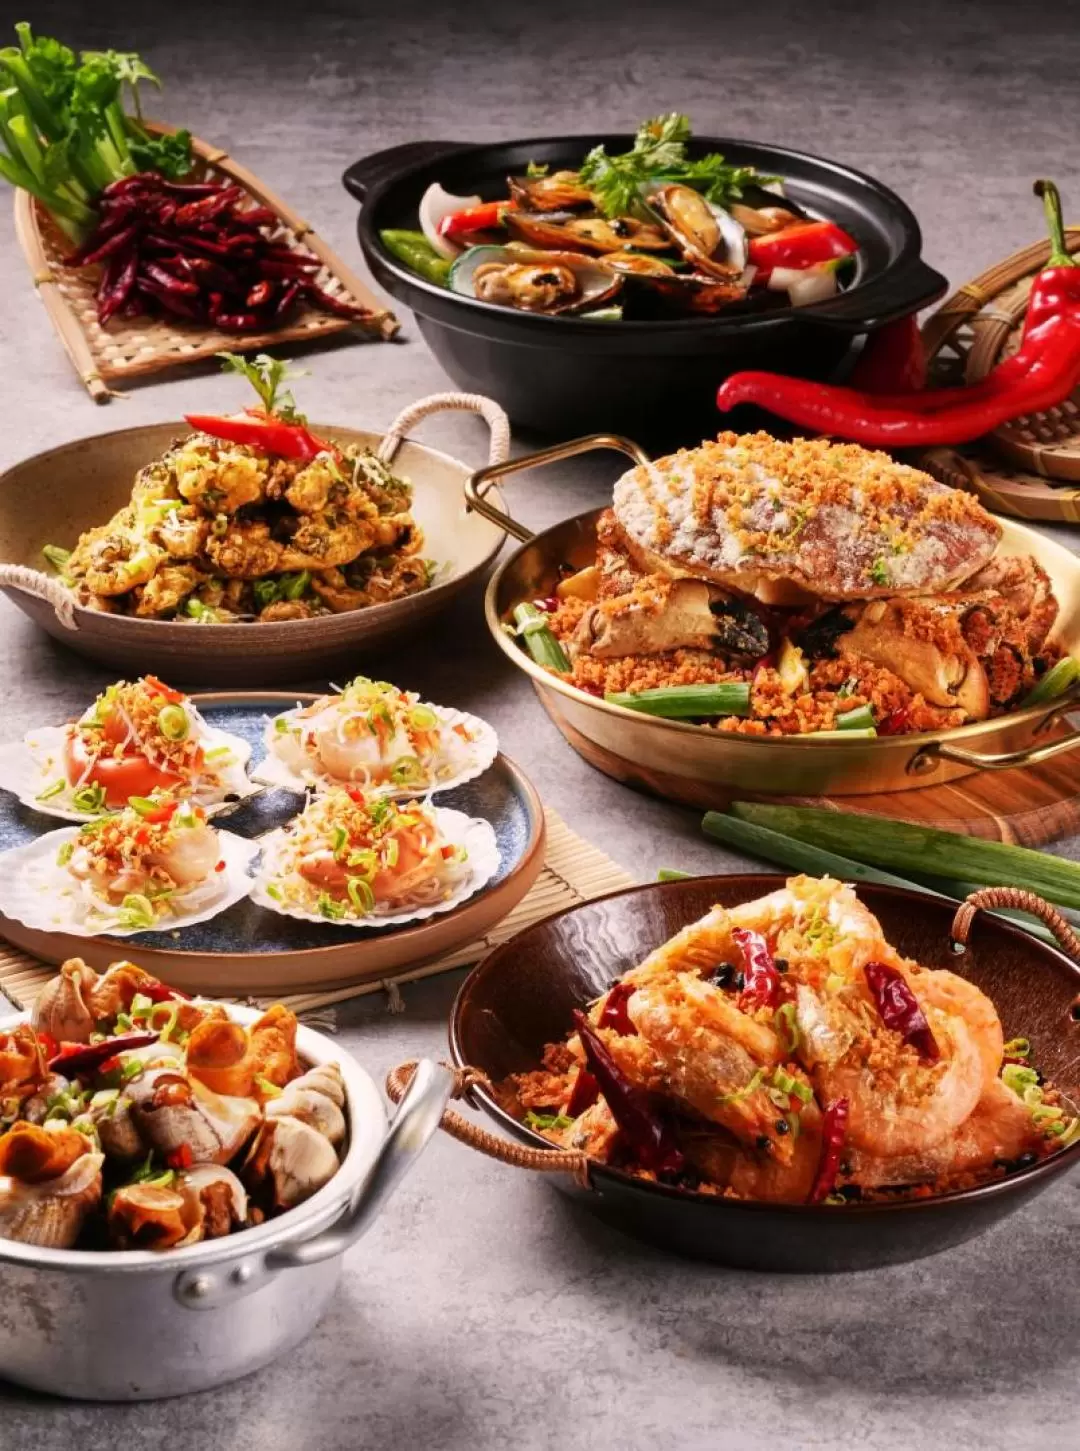 【Up to 23% Off】Holiday Inn Golden Mile Buffet | Bistro on the Mile l Lunch Buffet, Tea Buffet, Dinner Buffet